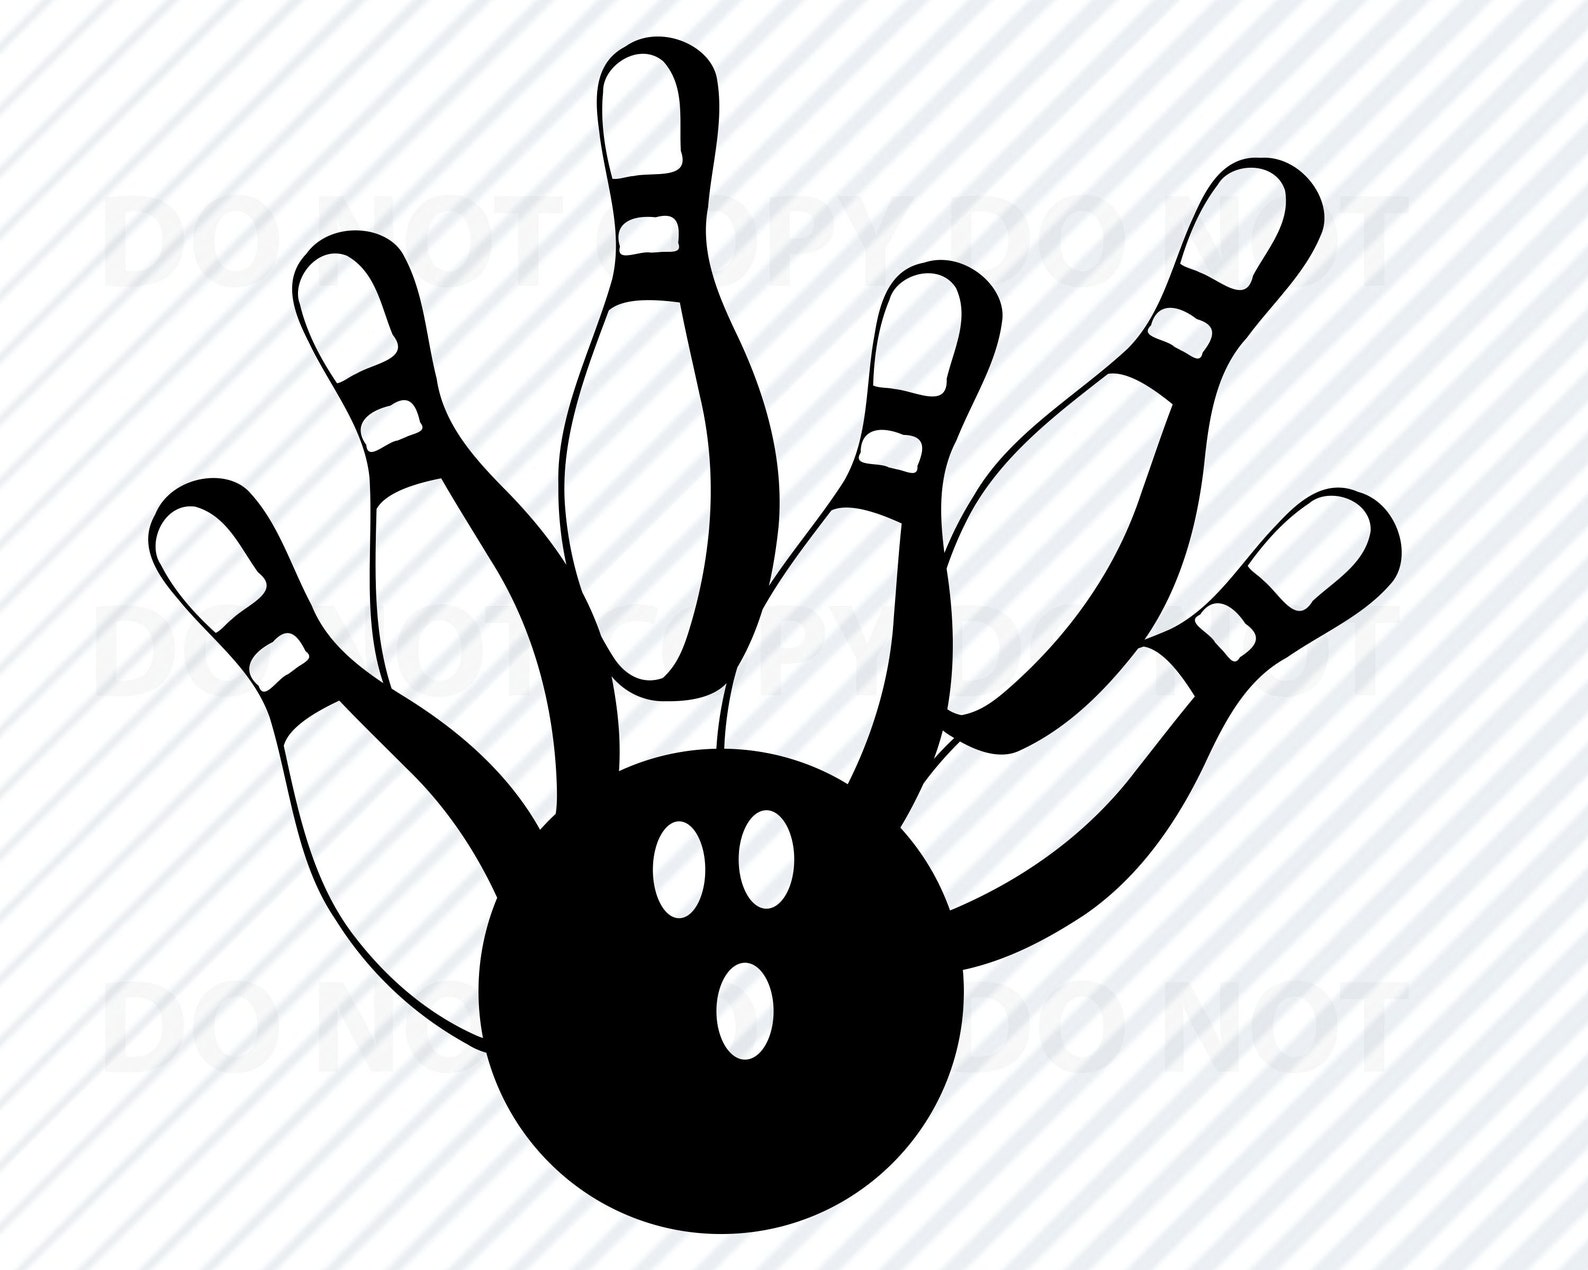 Bowling Strike SVG File for Cricut Bowling Pins Vector Images image 0.